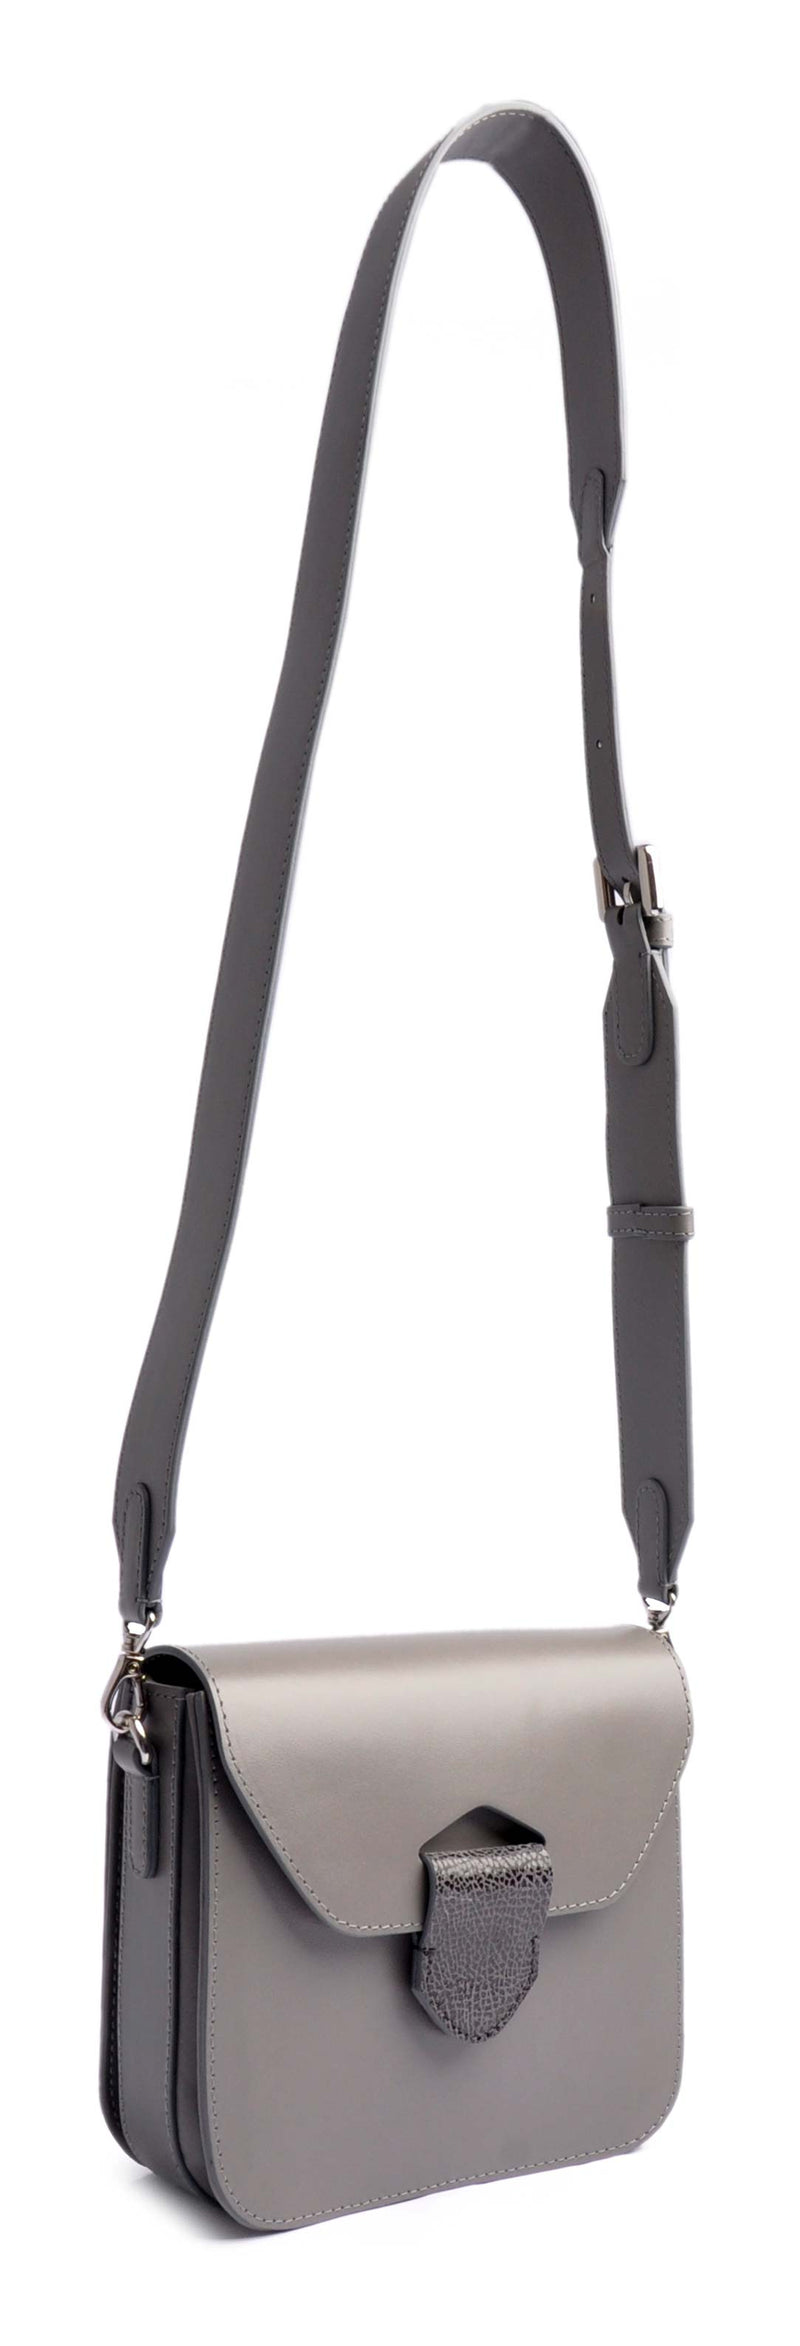 Shop Online . Handcrafted in Europe . ARROW BOX . SHOULDERBAG . Grey Lether . Fine micro-suede lining